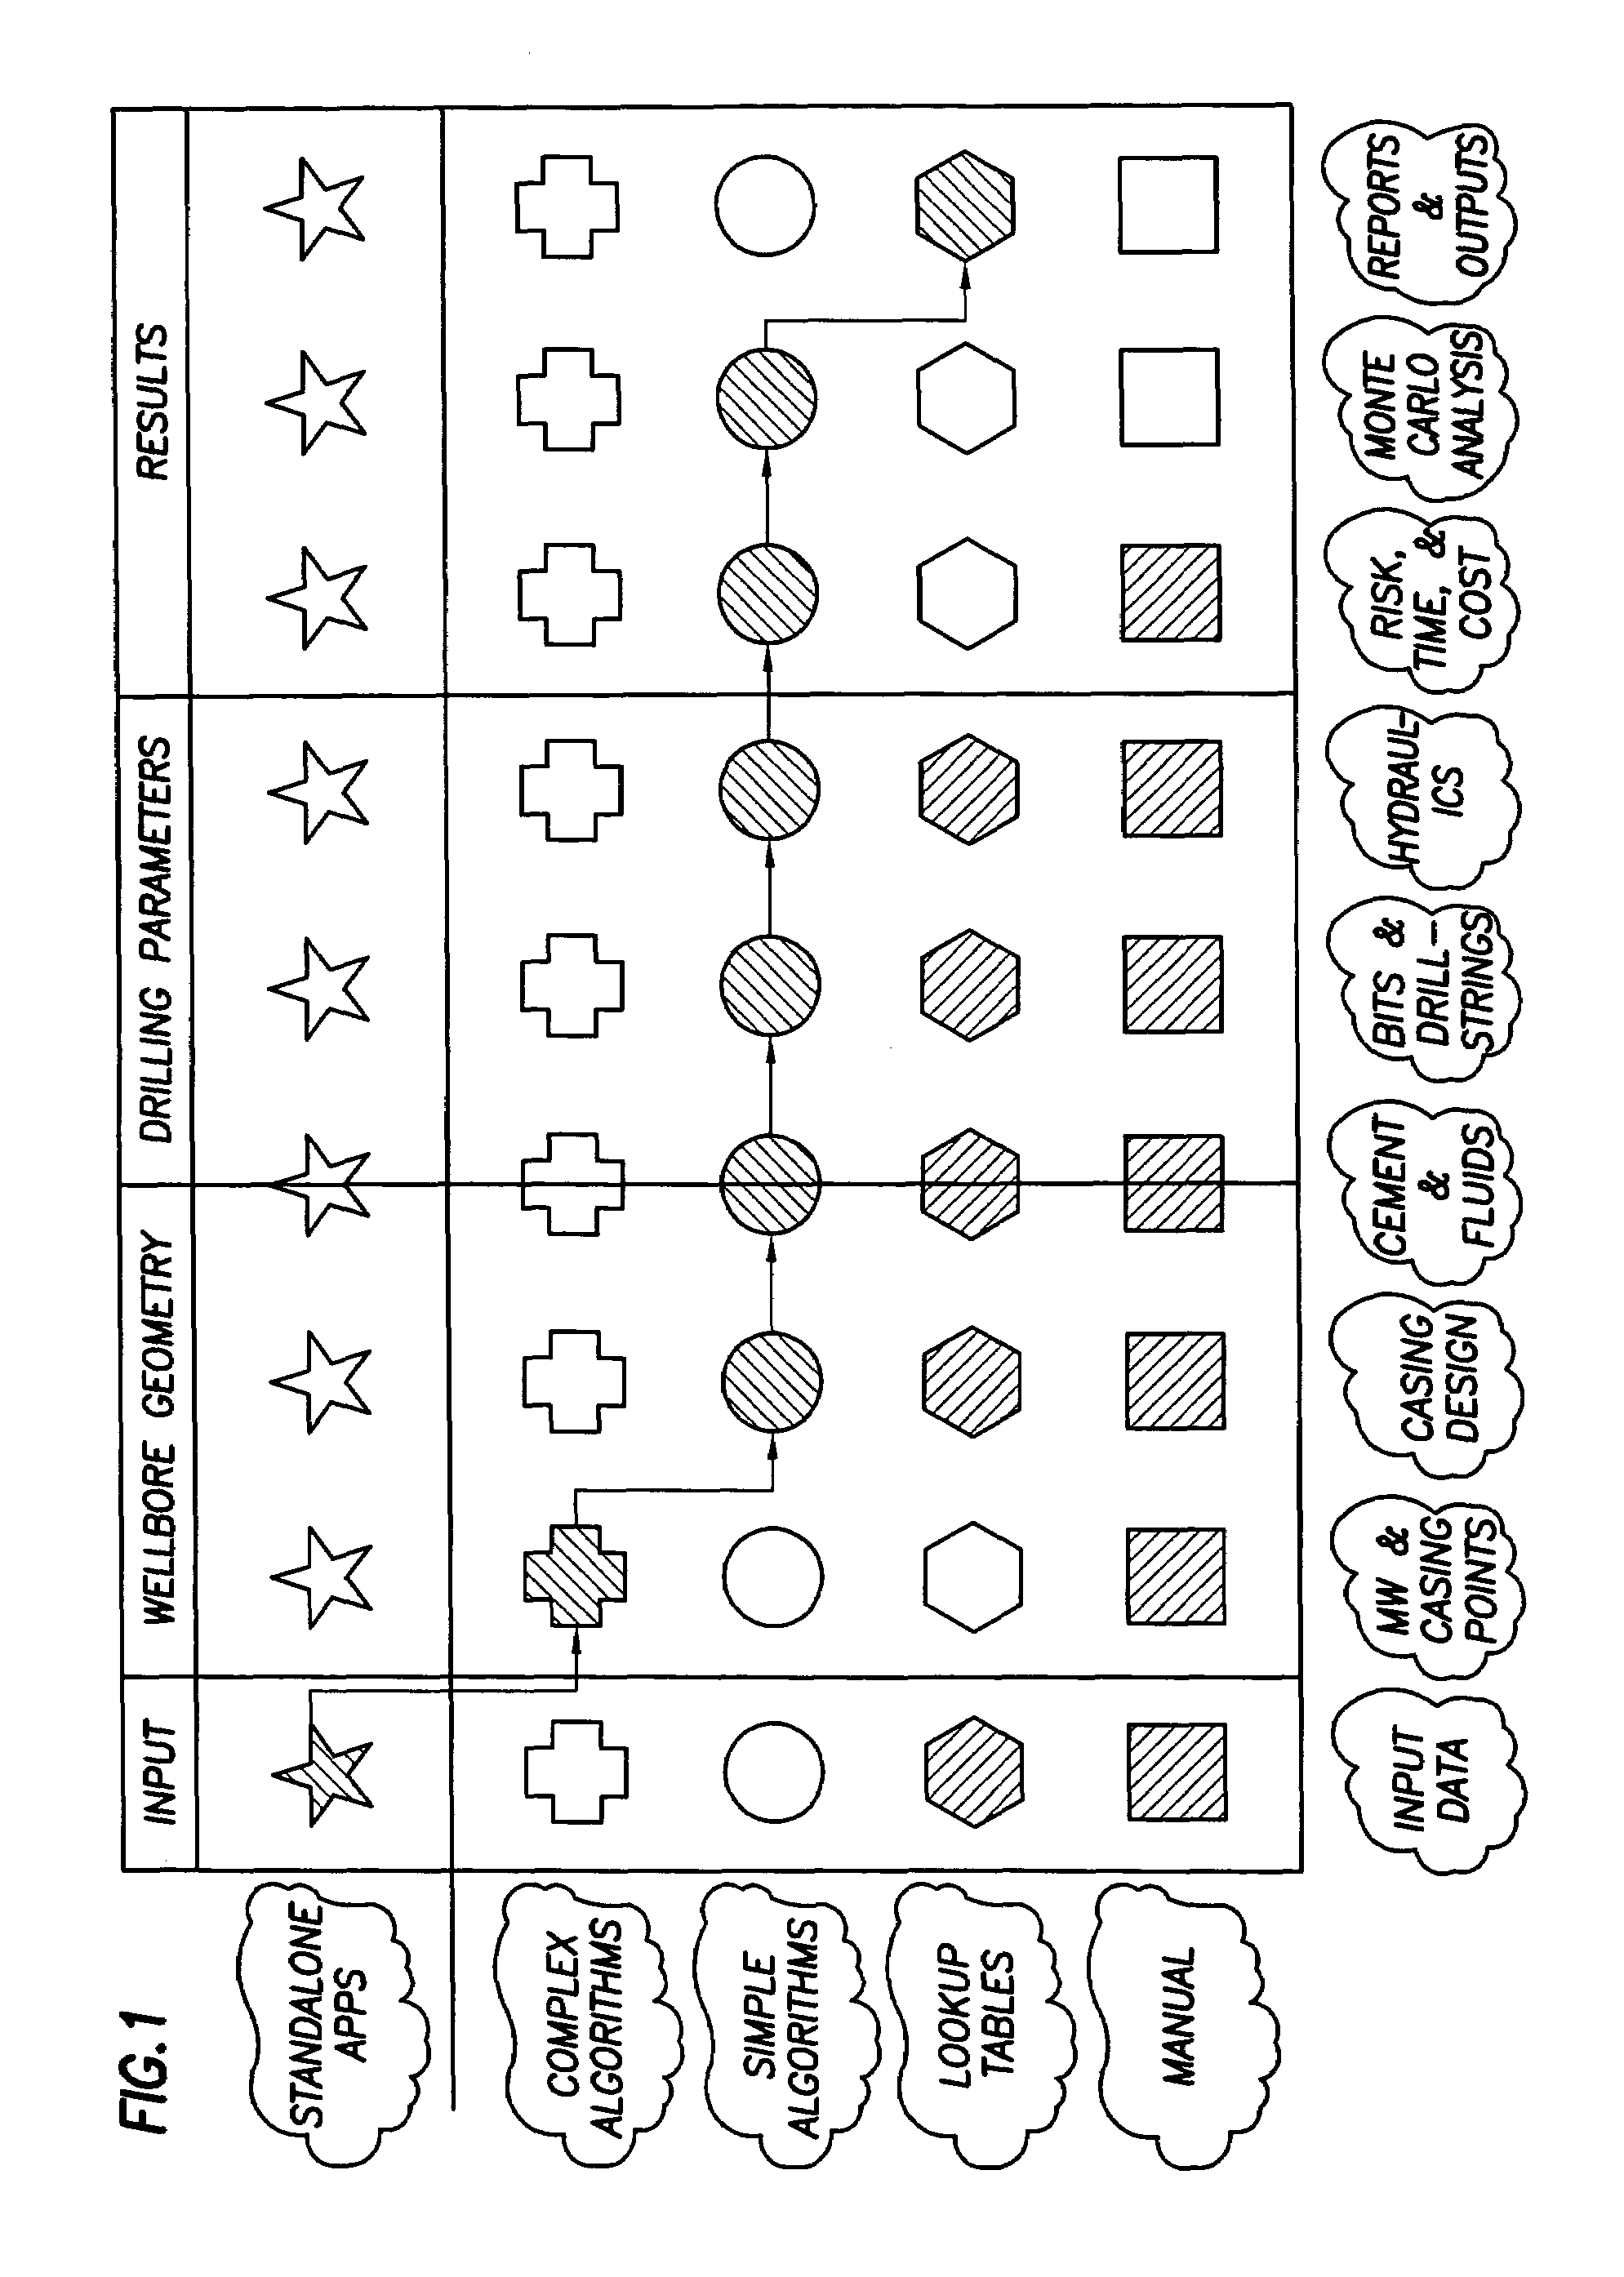 Method and apparatus and program storage device including an integrated well planning workflow control system with process dependencies